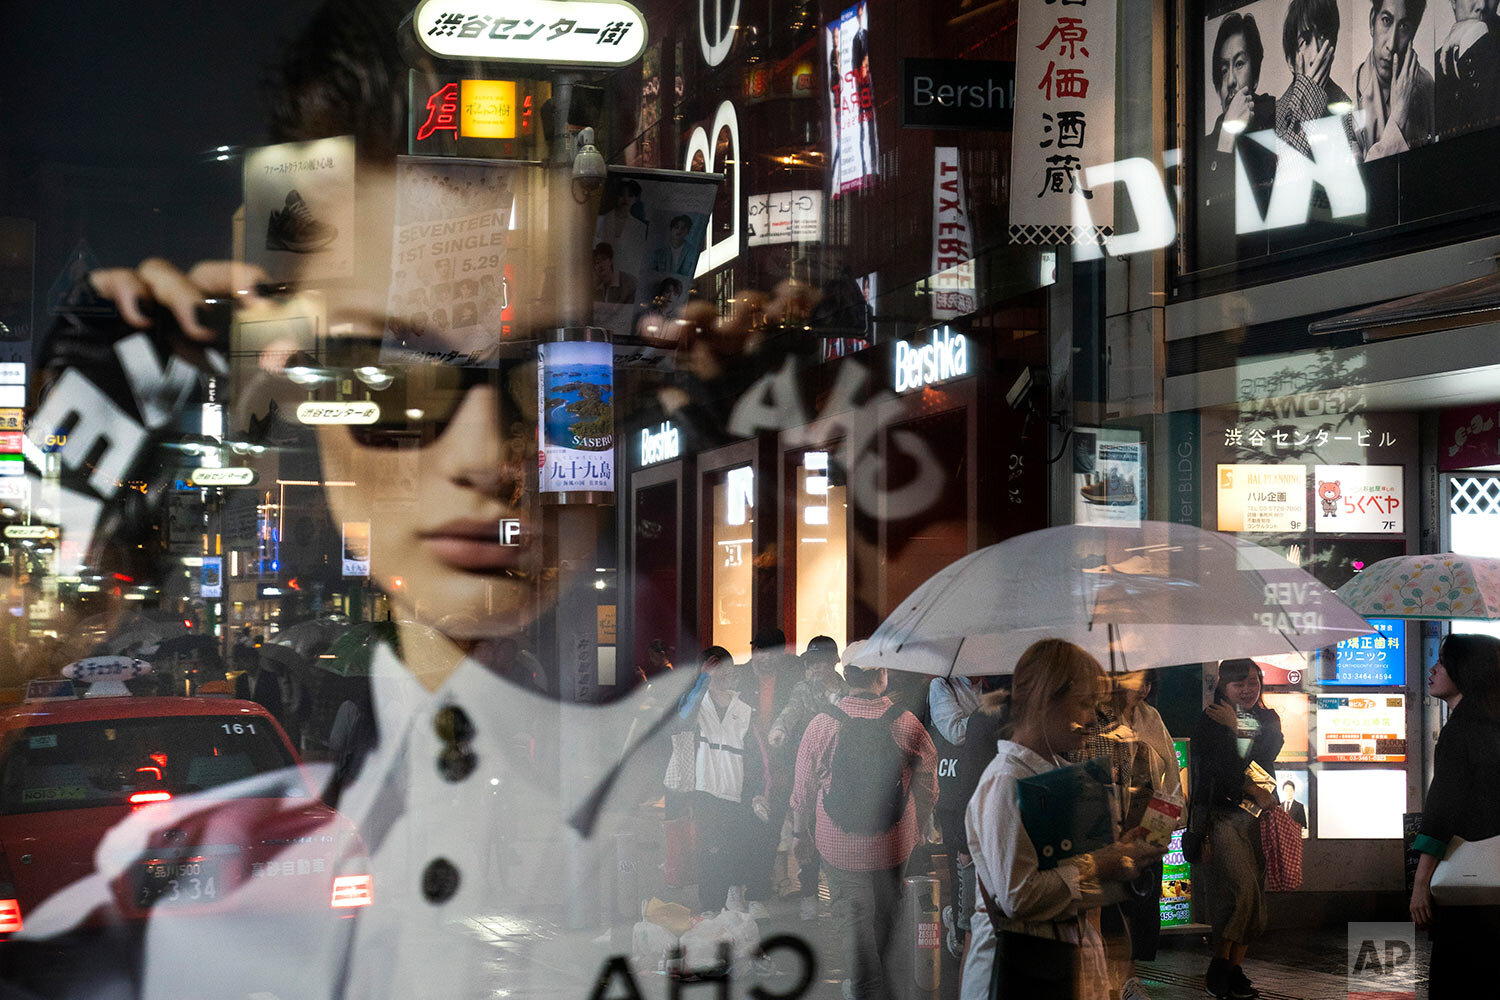  Pedestrians are seen through the reflection of an advertisement in a window as they walk along a busy street in the Shibuya district of Tokyo on June 9, 2019. (AP Photo/Jae C. Hong) 